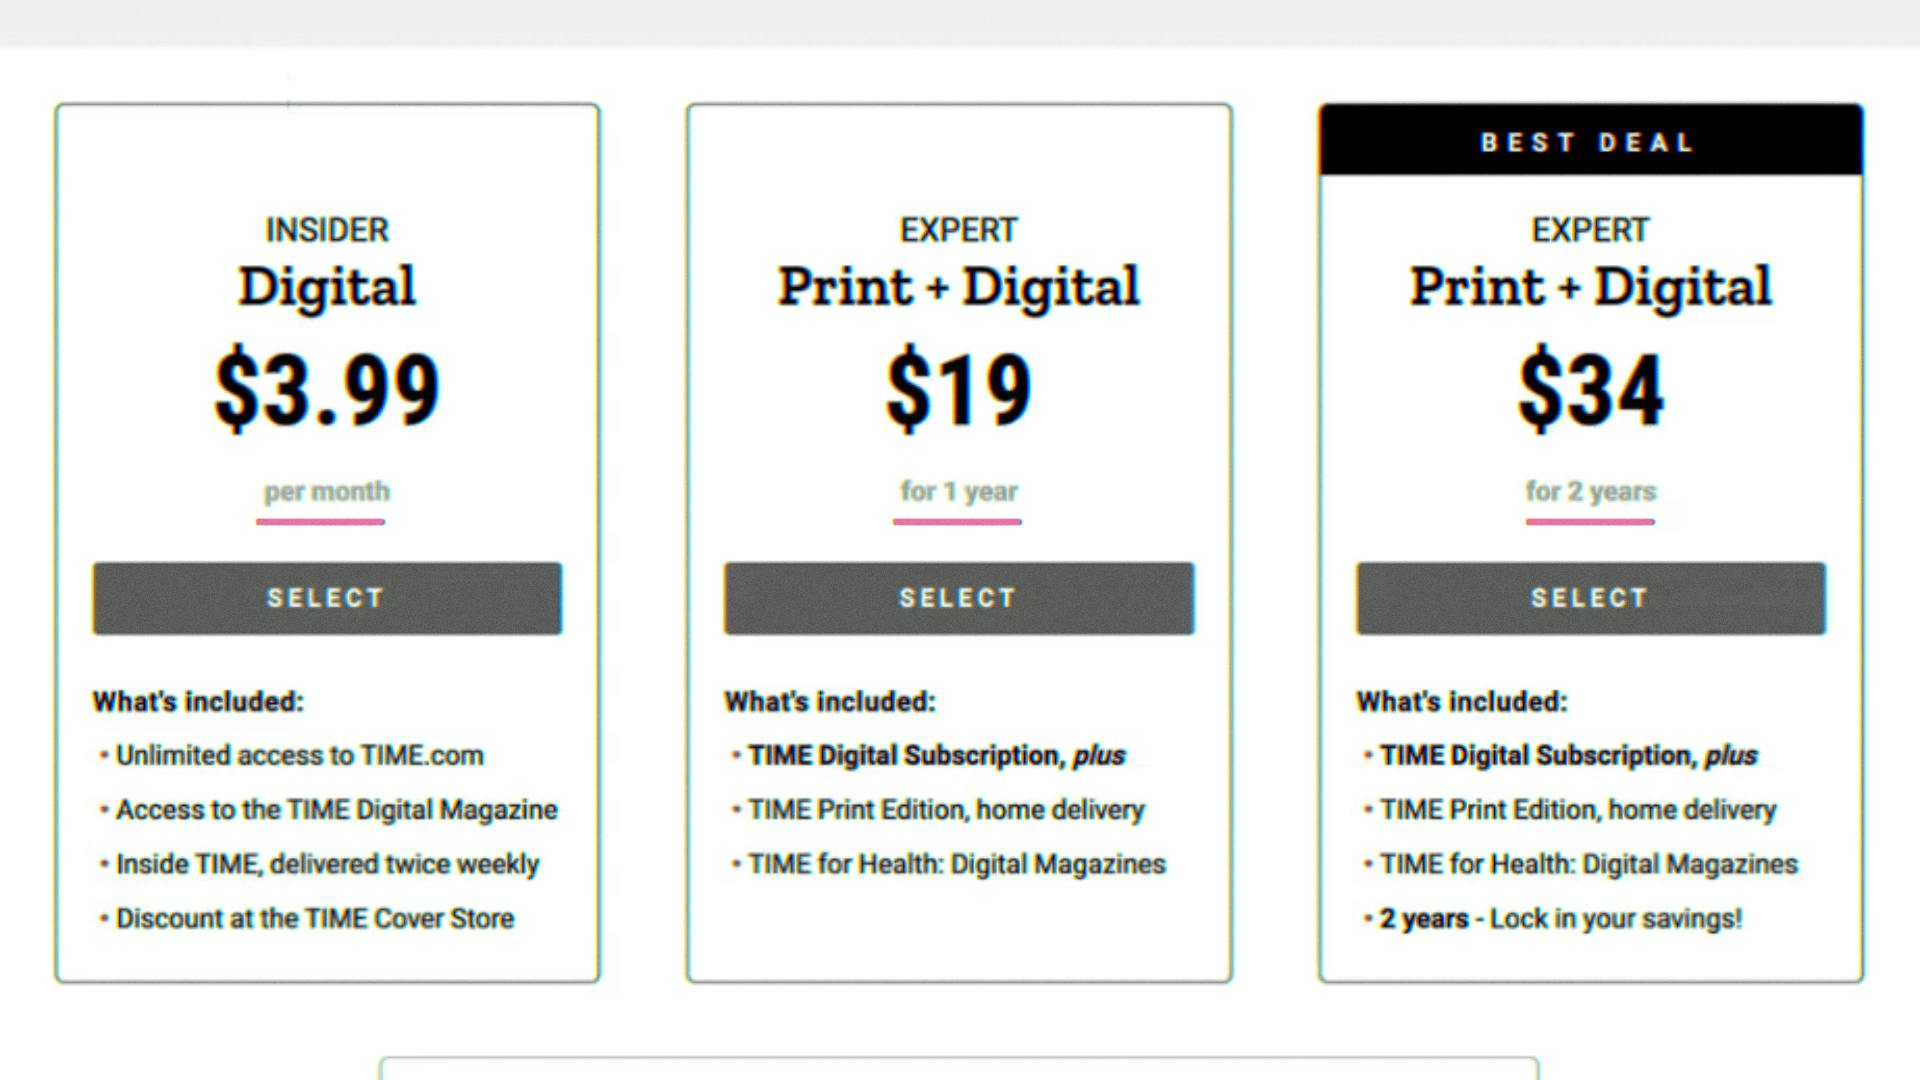 Time's pricing page featuring Digital for $3.99 per month, Print + Digital for $19 for per year, and Print + Digital for $34 per 2 years